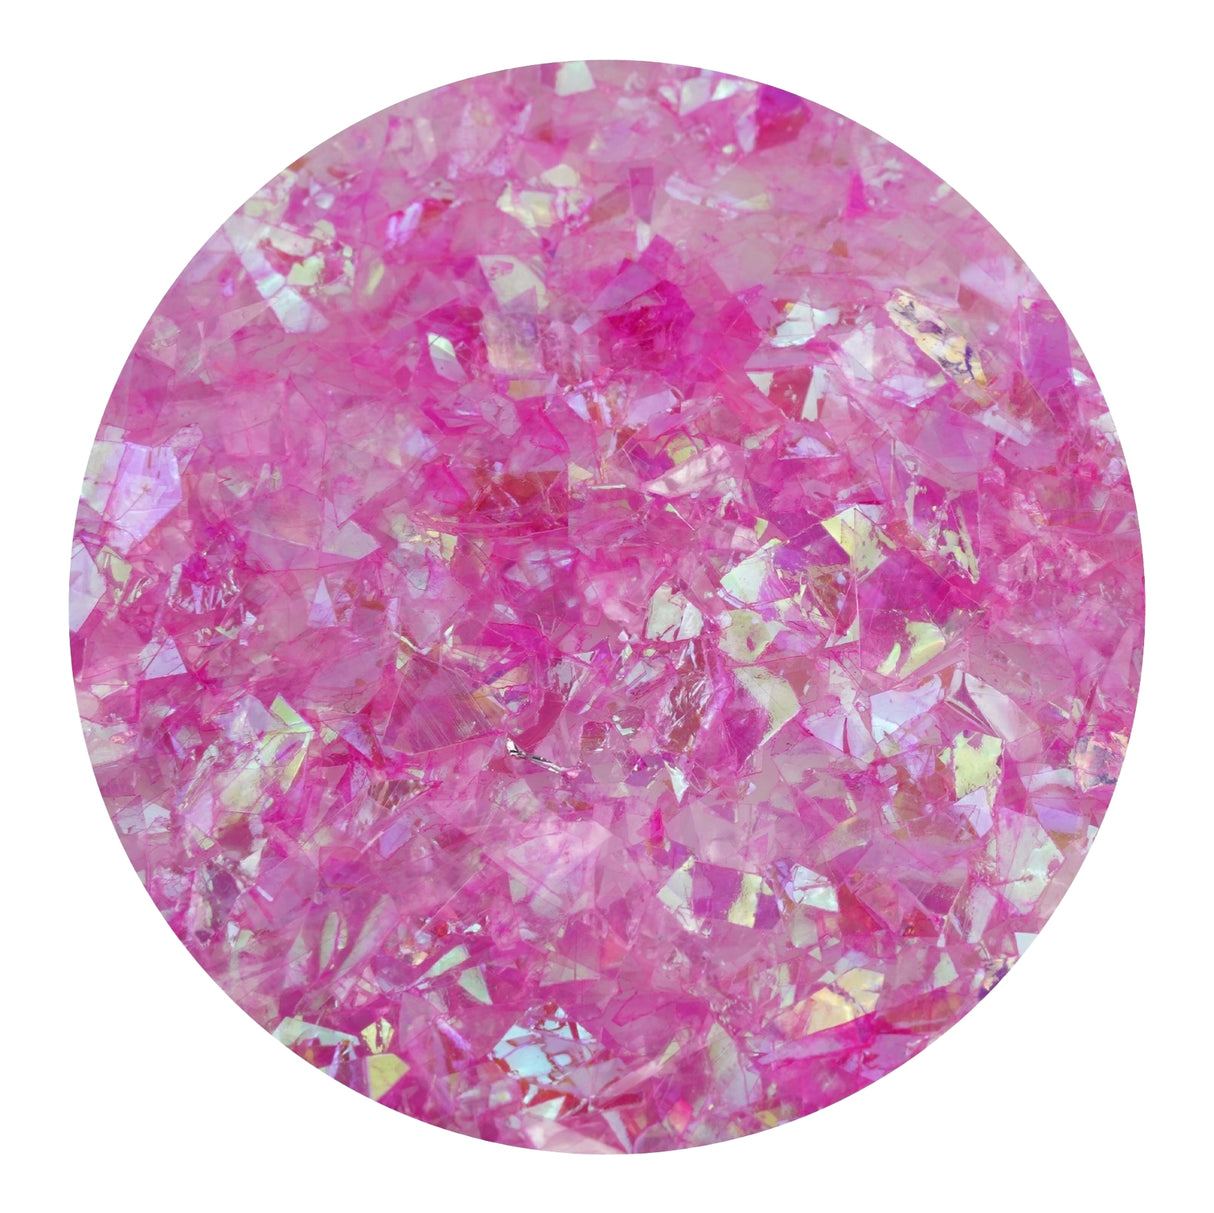 Iridescent Fractured Flakes - Pink